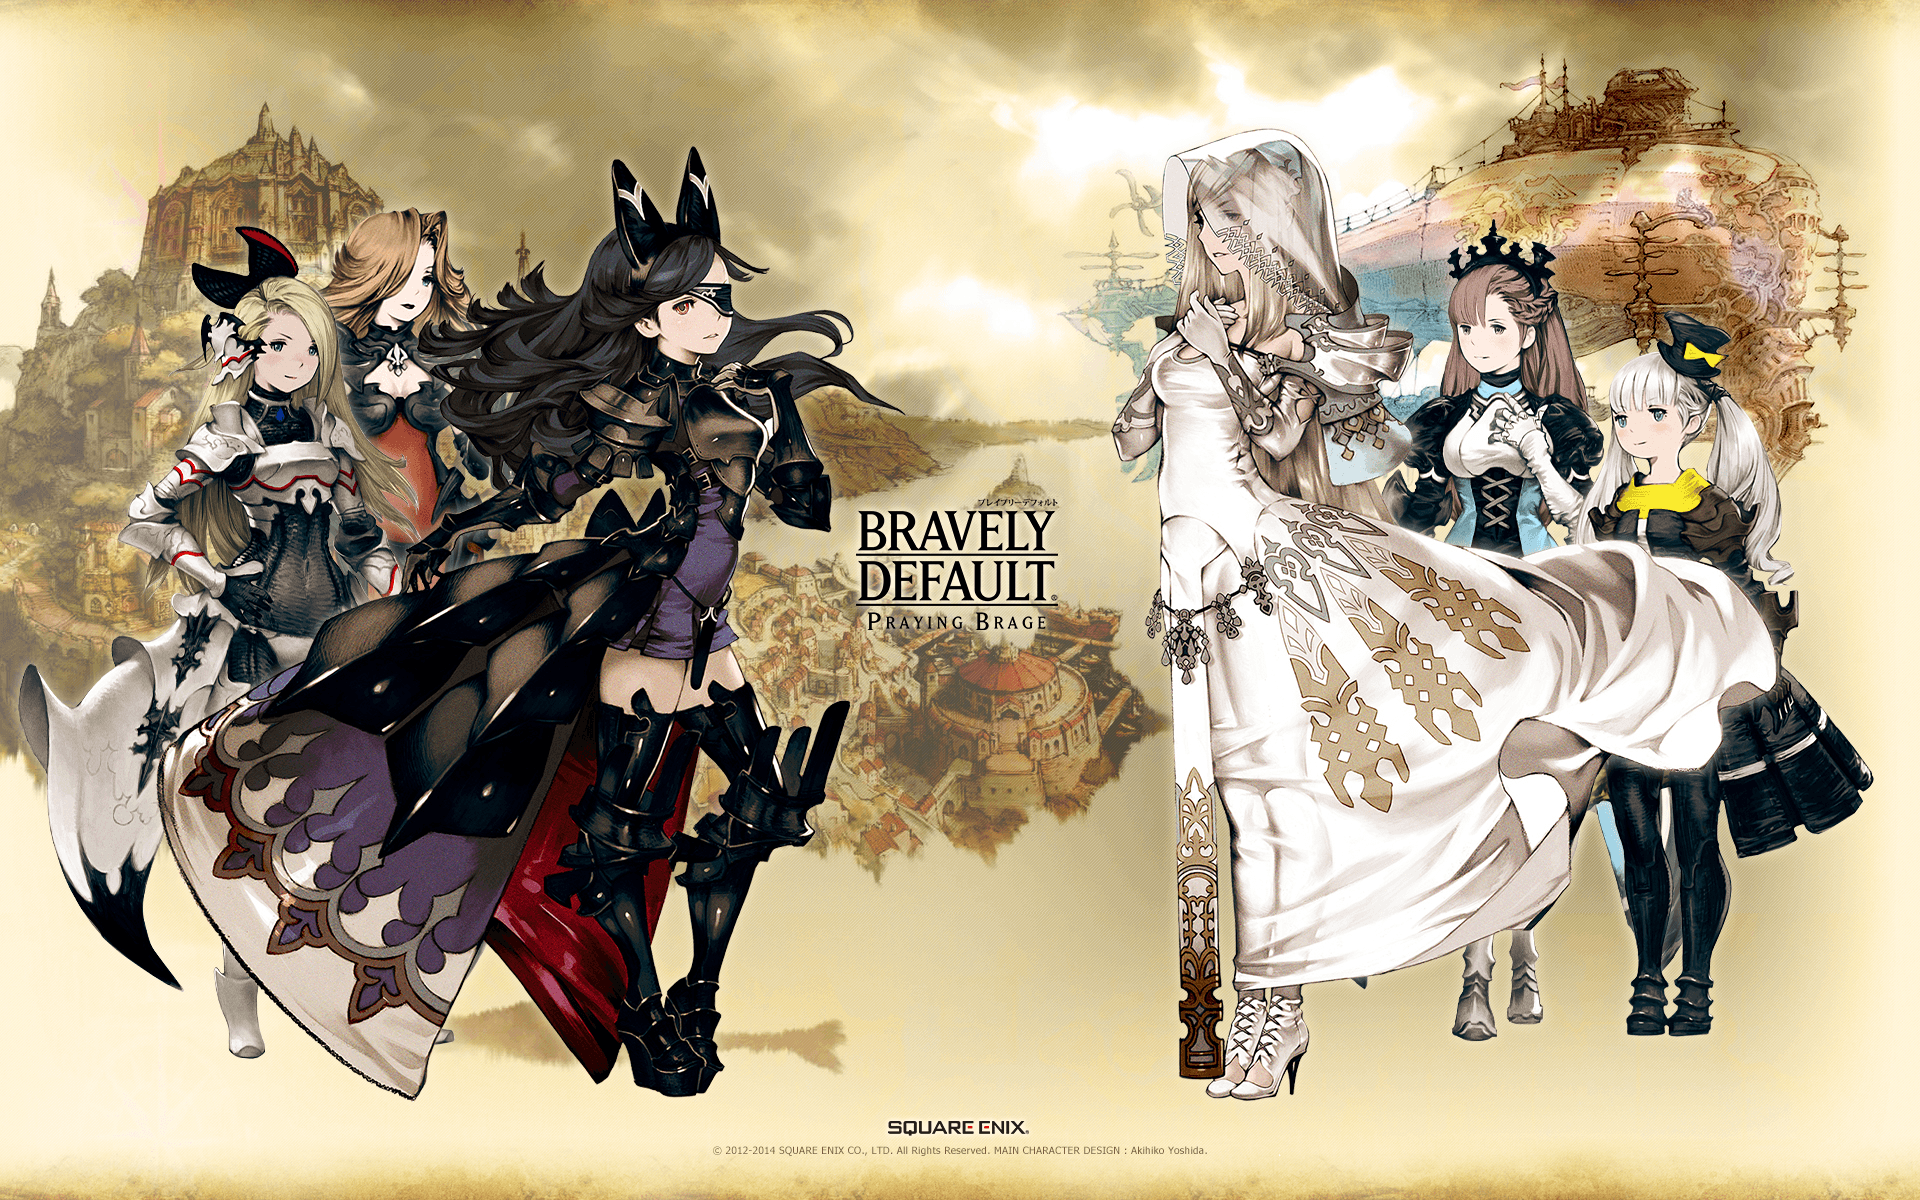 Bravely Default Wallpapers - Wallpaper Cave.